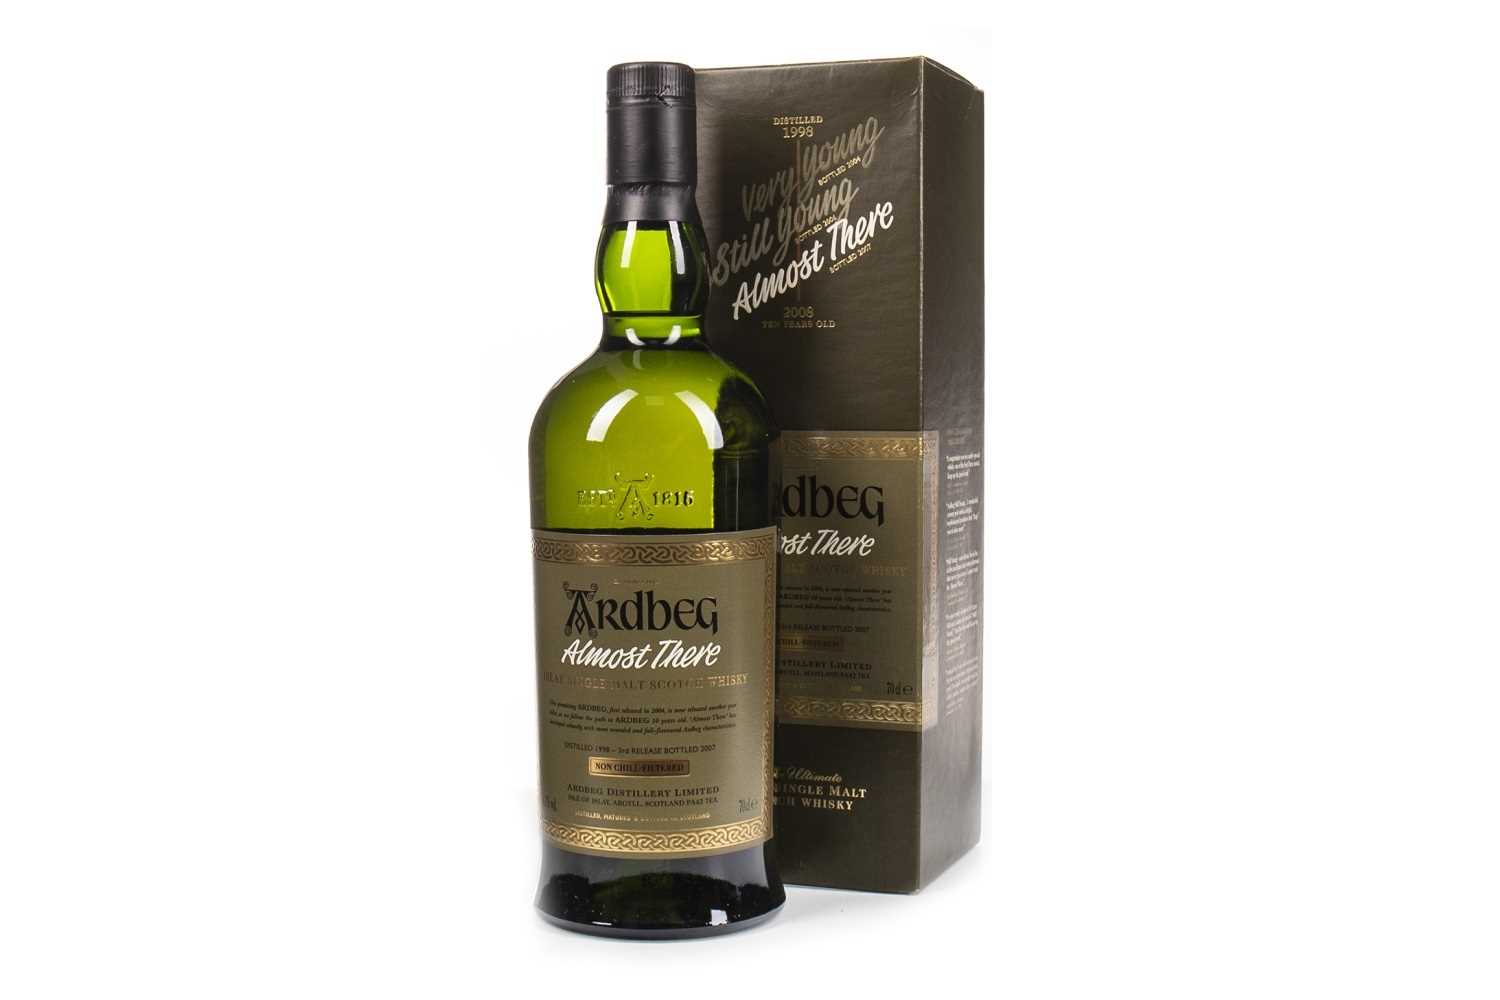 Lot 260 - ARDBEG 1998 ALMOST THERE